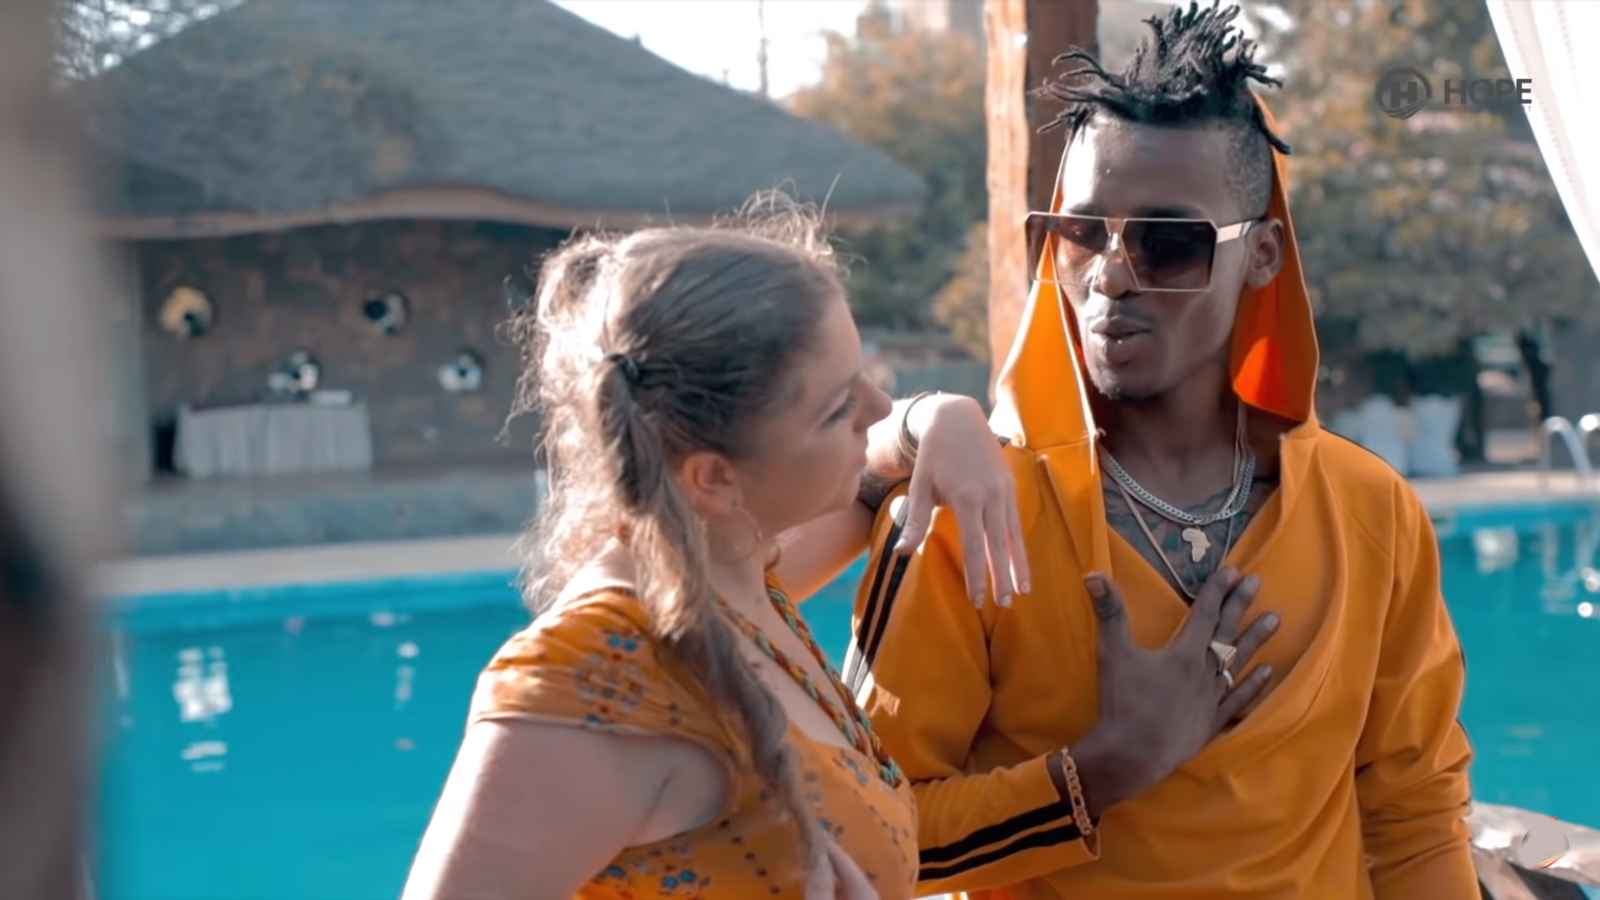 90 Day Fiance star Ariela starred in an Ethiopian music video